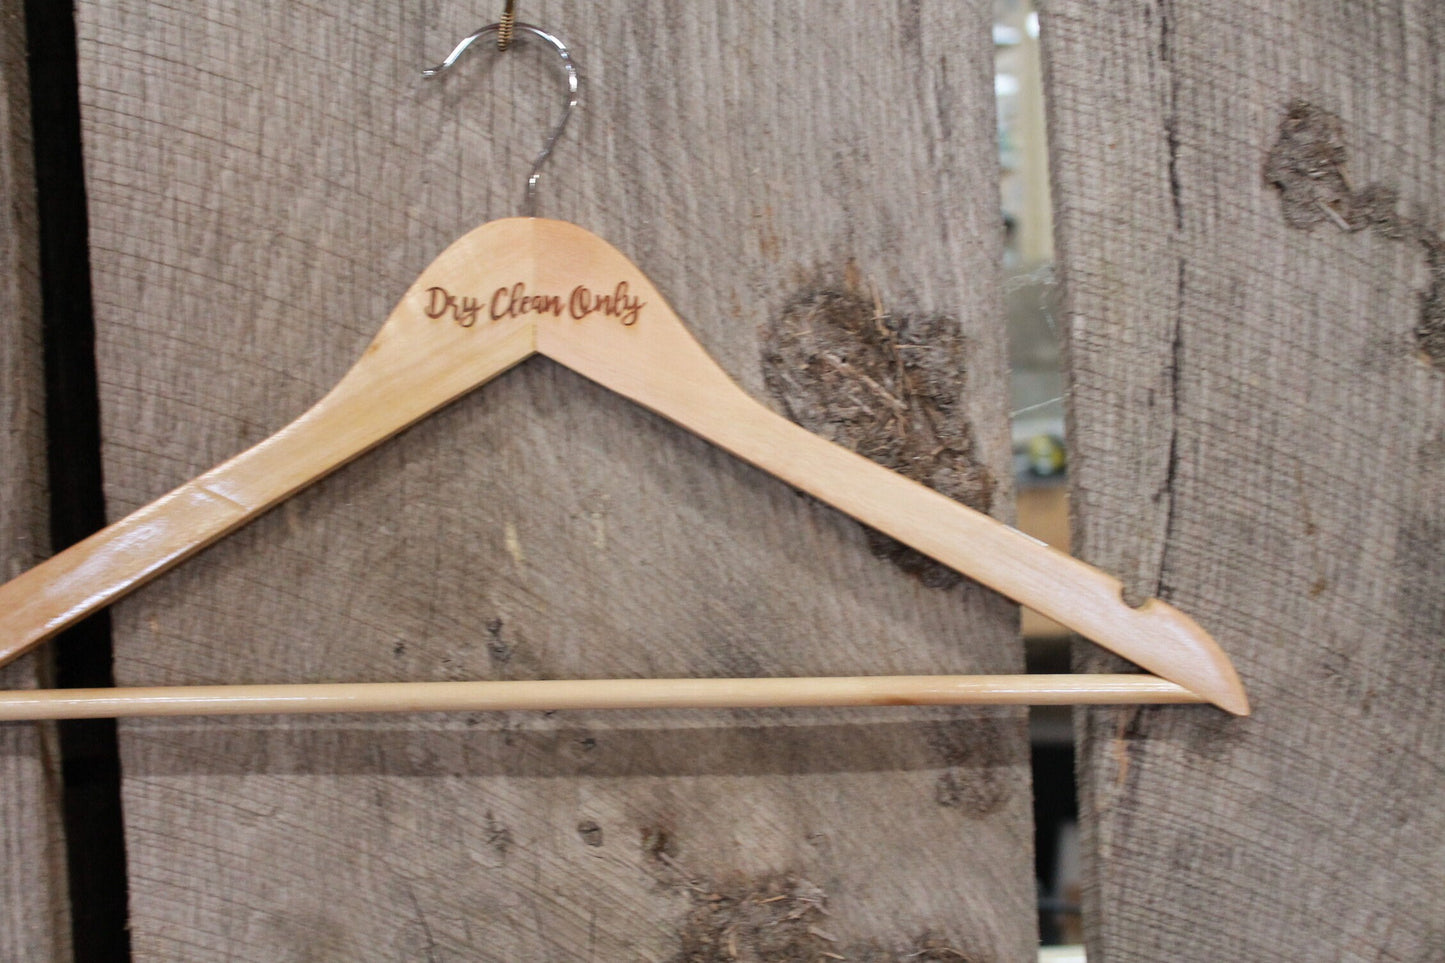 Dry Clean Only Clothes Hanger Engraved Hard Wood Sturdy Dry Cleaner Note Wash Laundry